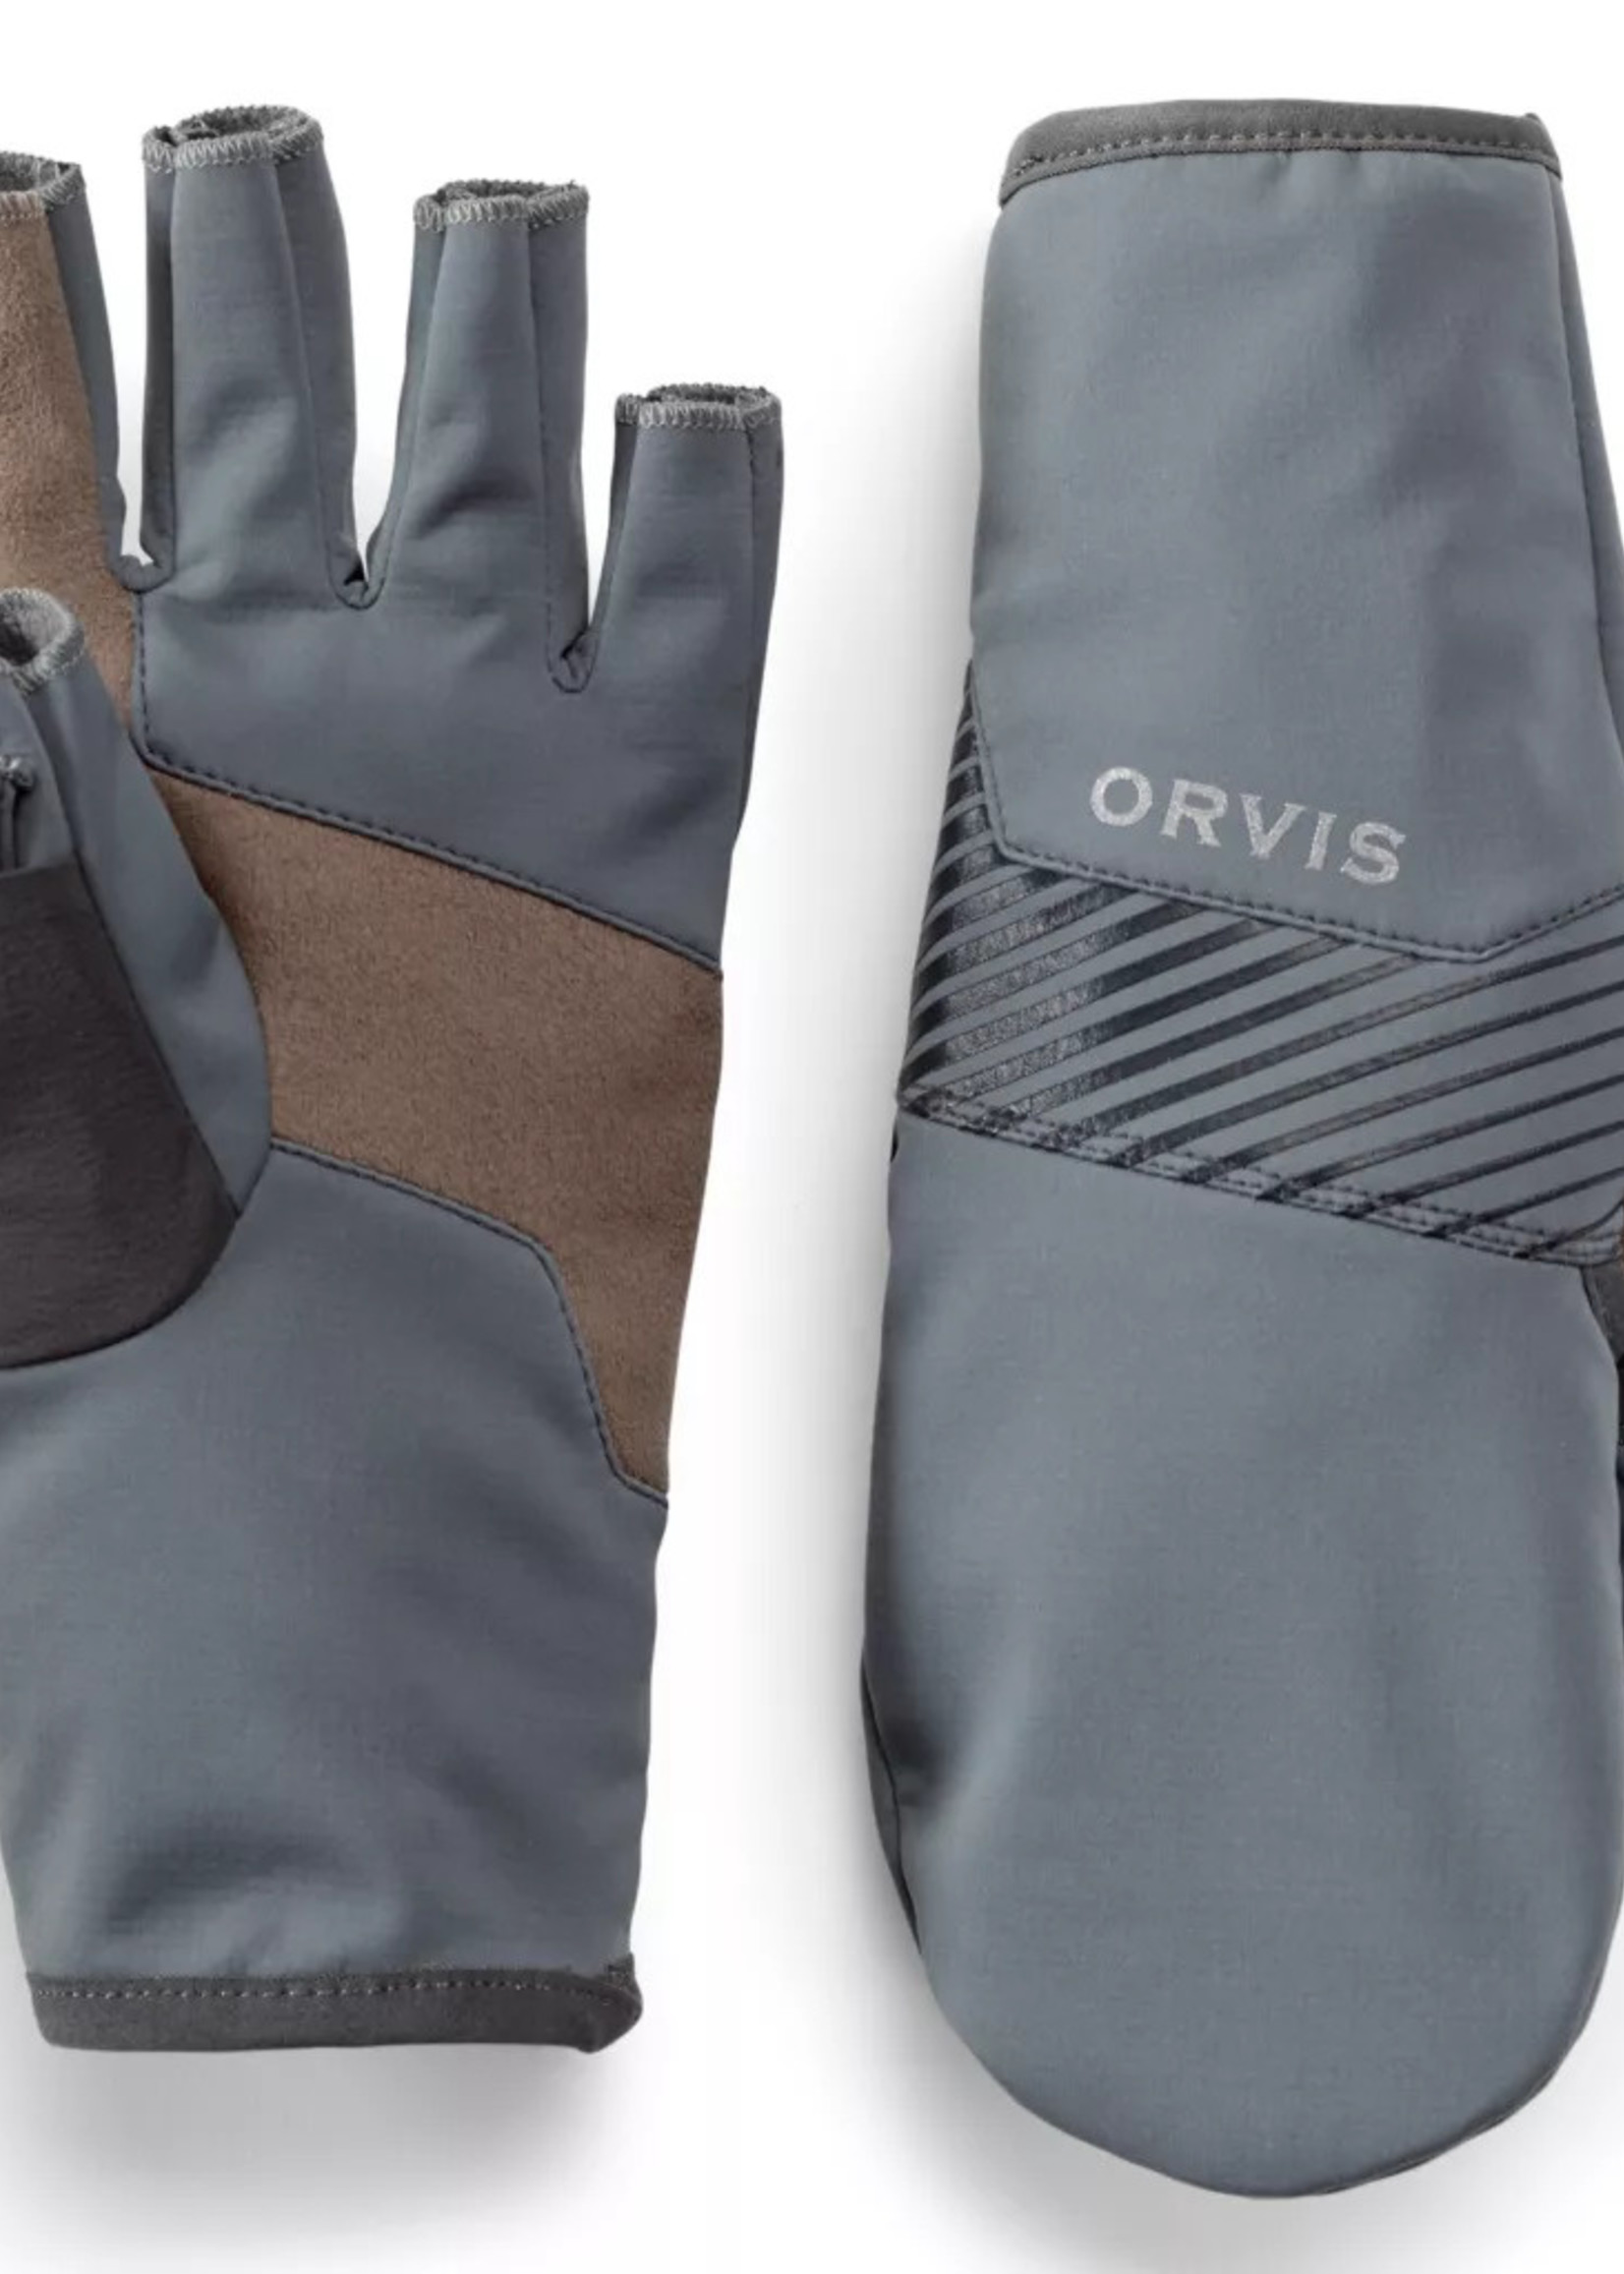 Orvis Orvis Softshell Convertible Mittens (M)